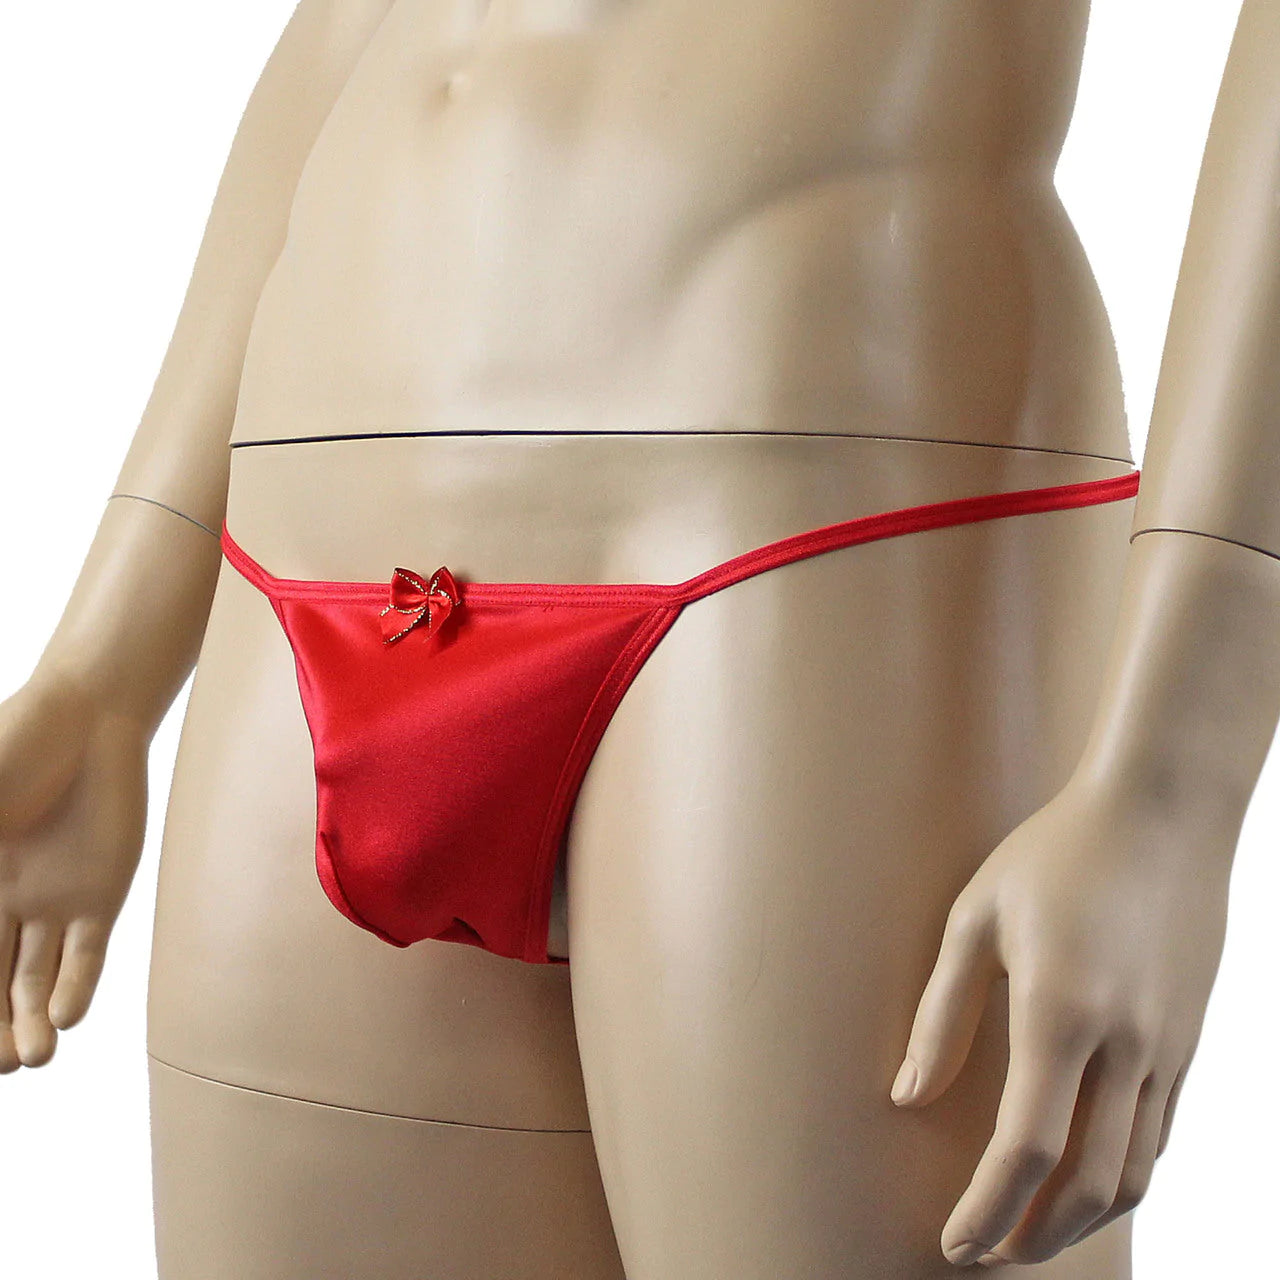 SALE - Mens Xmas Stretch Spandex Pouch G string with Red & Gold Bow